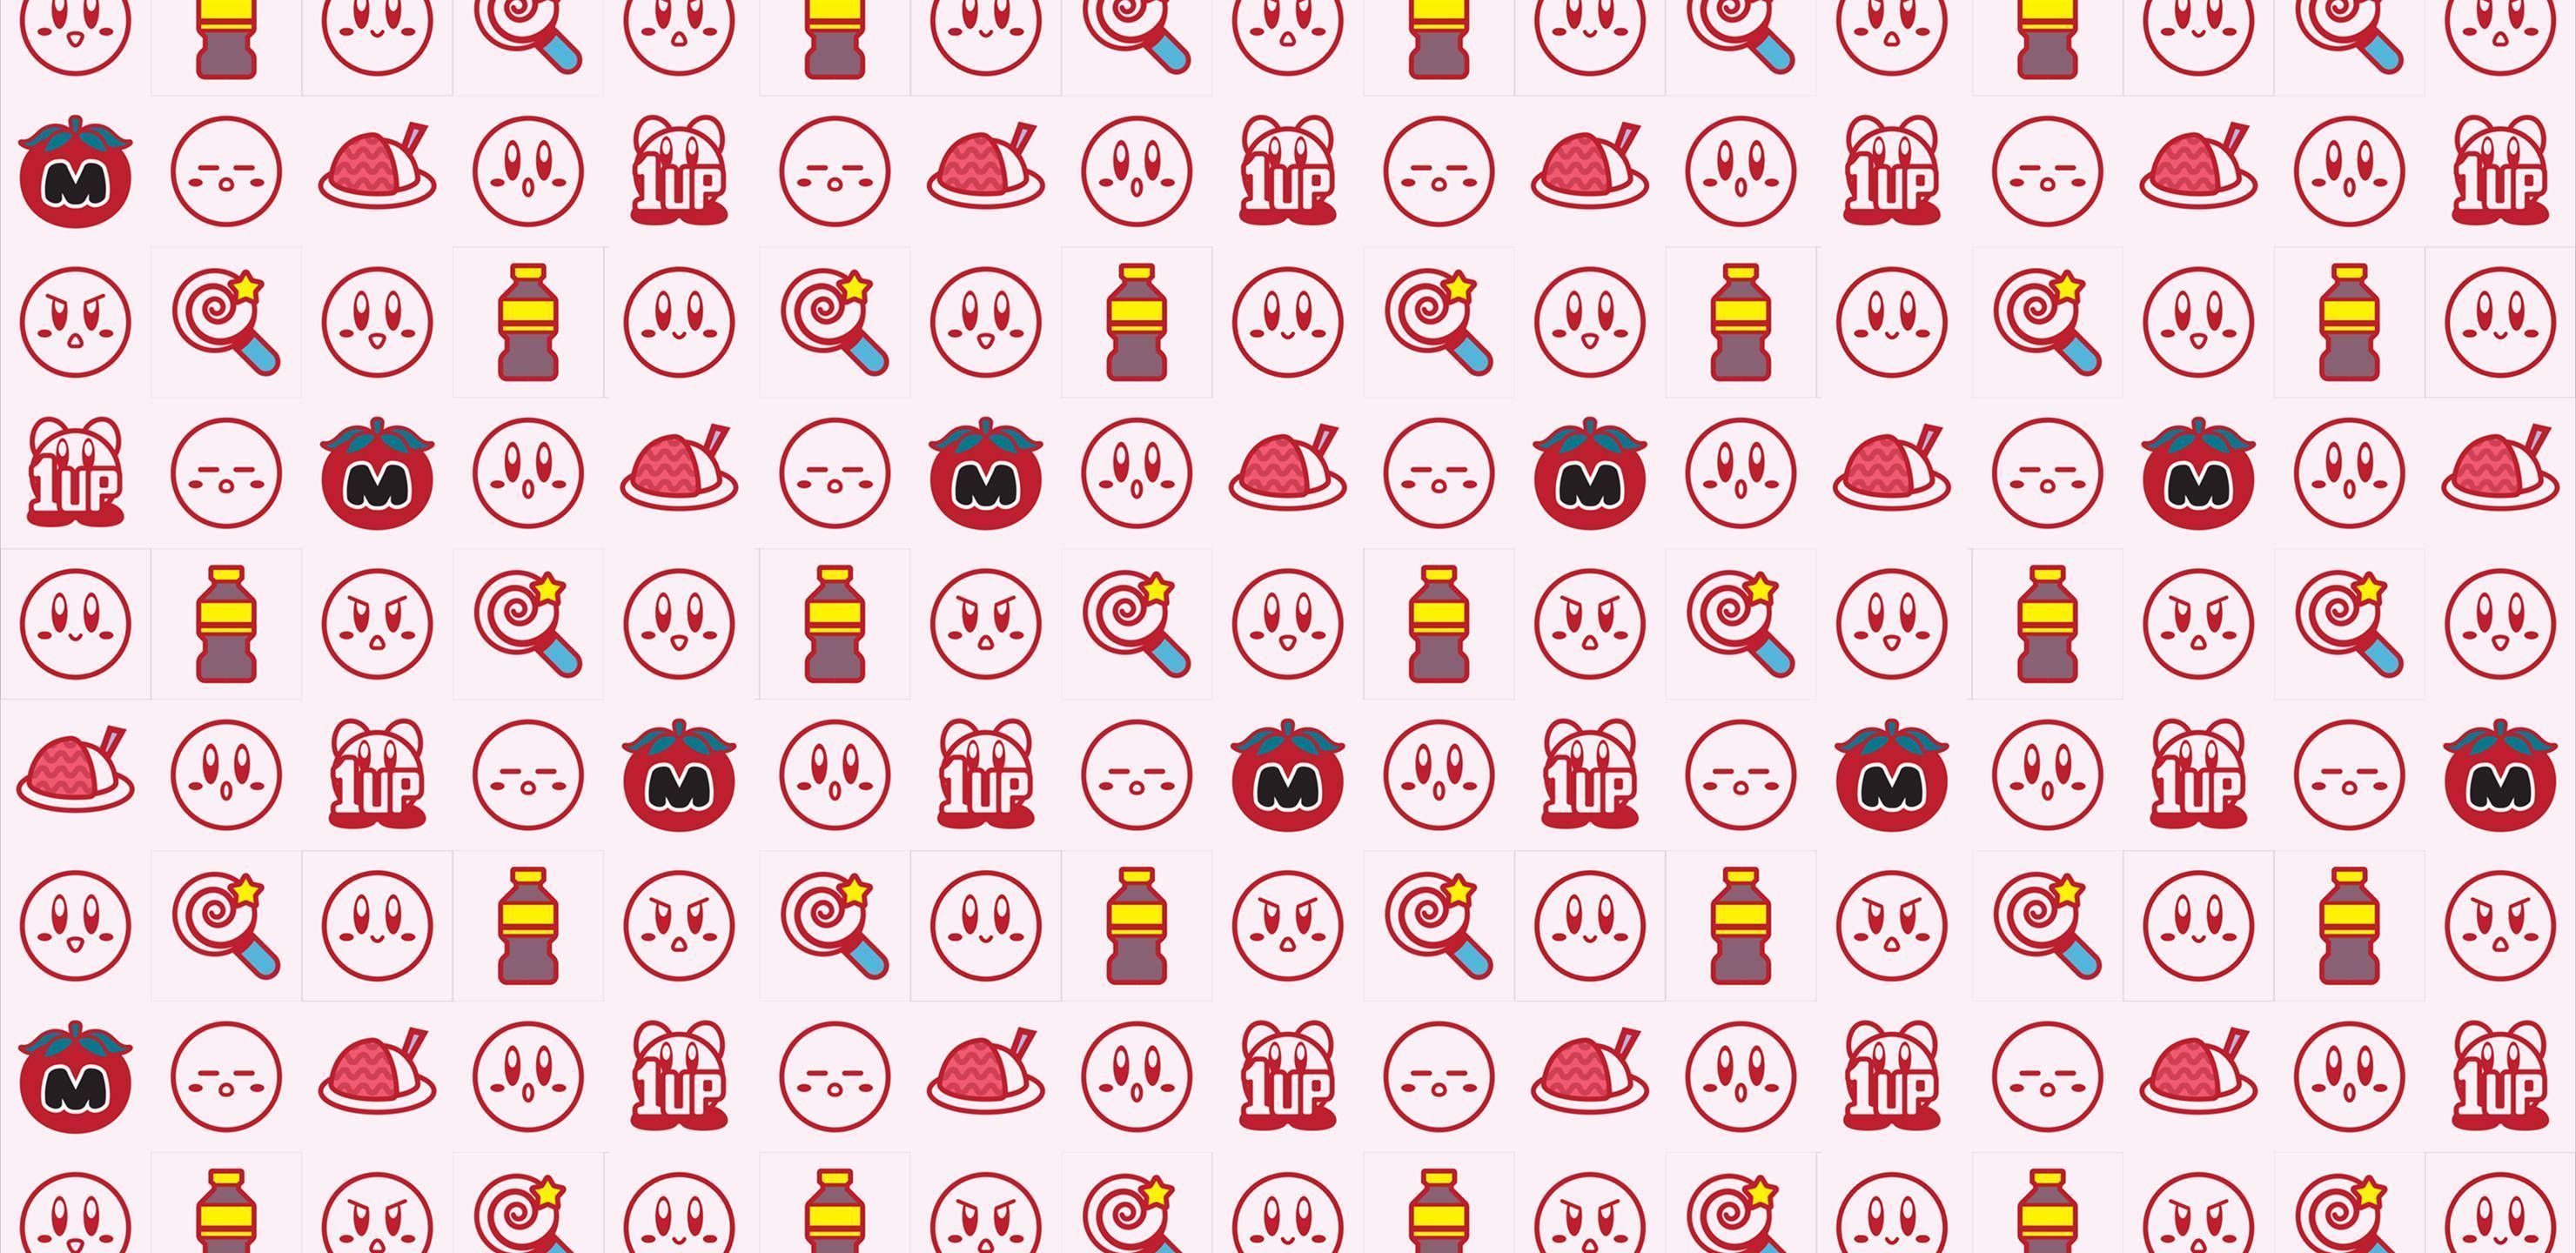 A pattern of red and pink food related emojis on a white background - Kirby